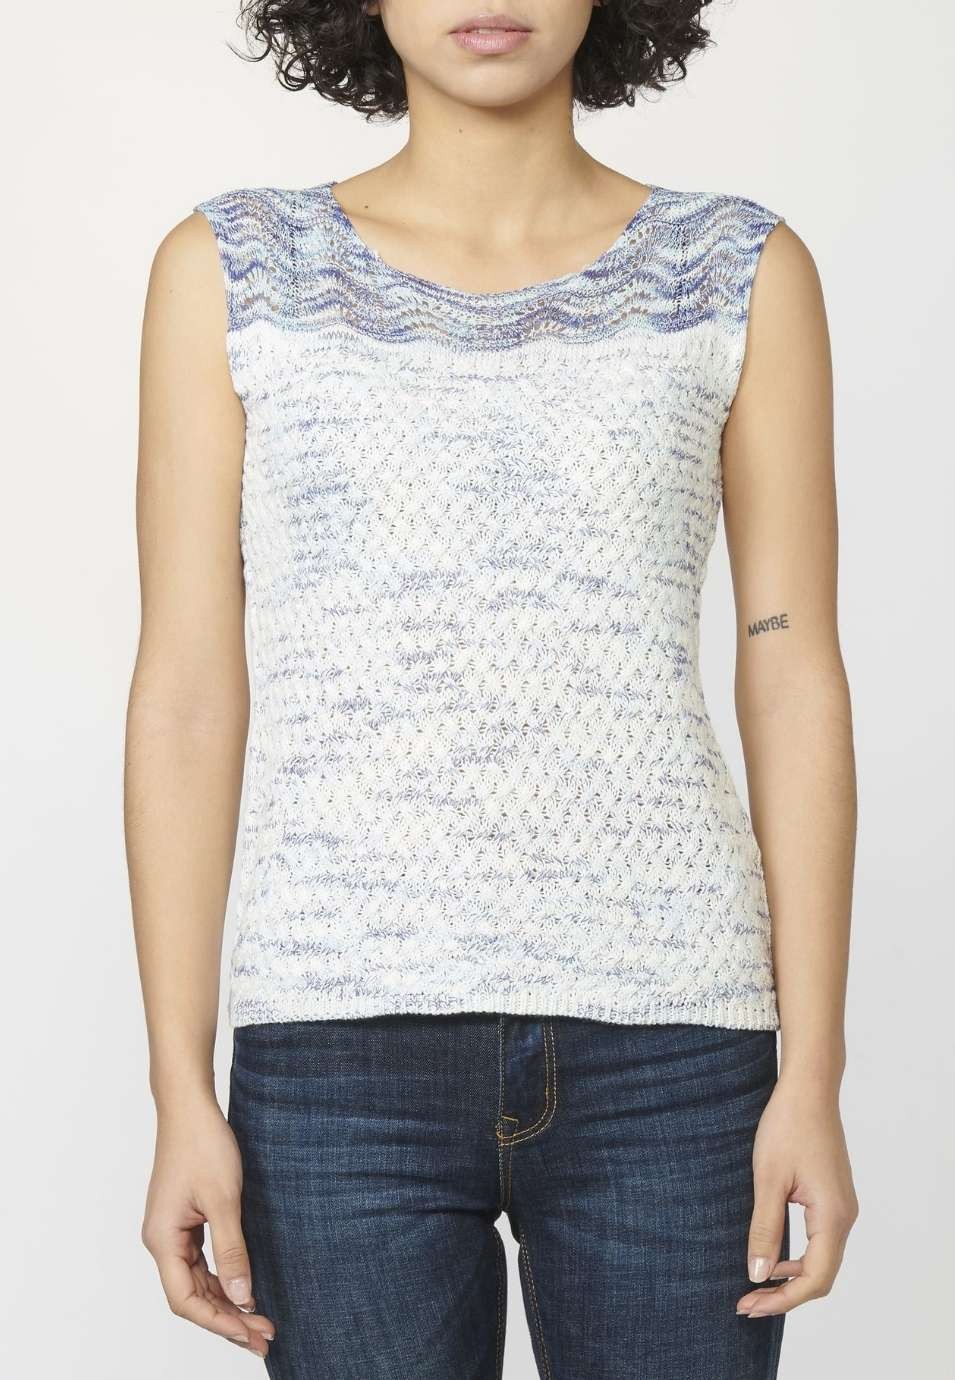 Sleeveless tricot top with boat neck and openwork details in Navy color for Woman 5